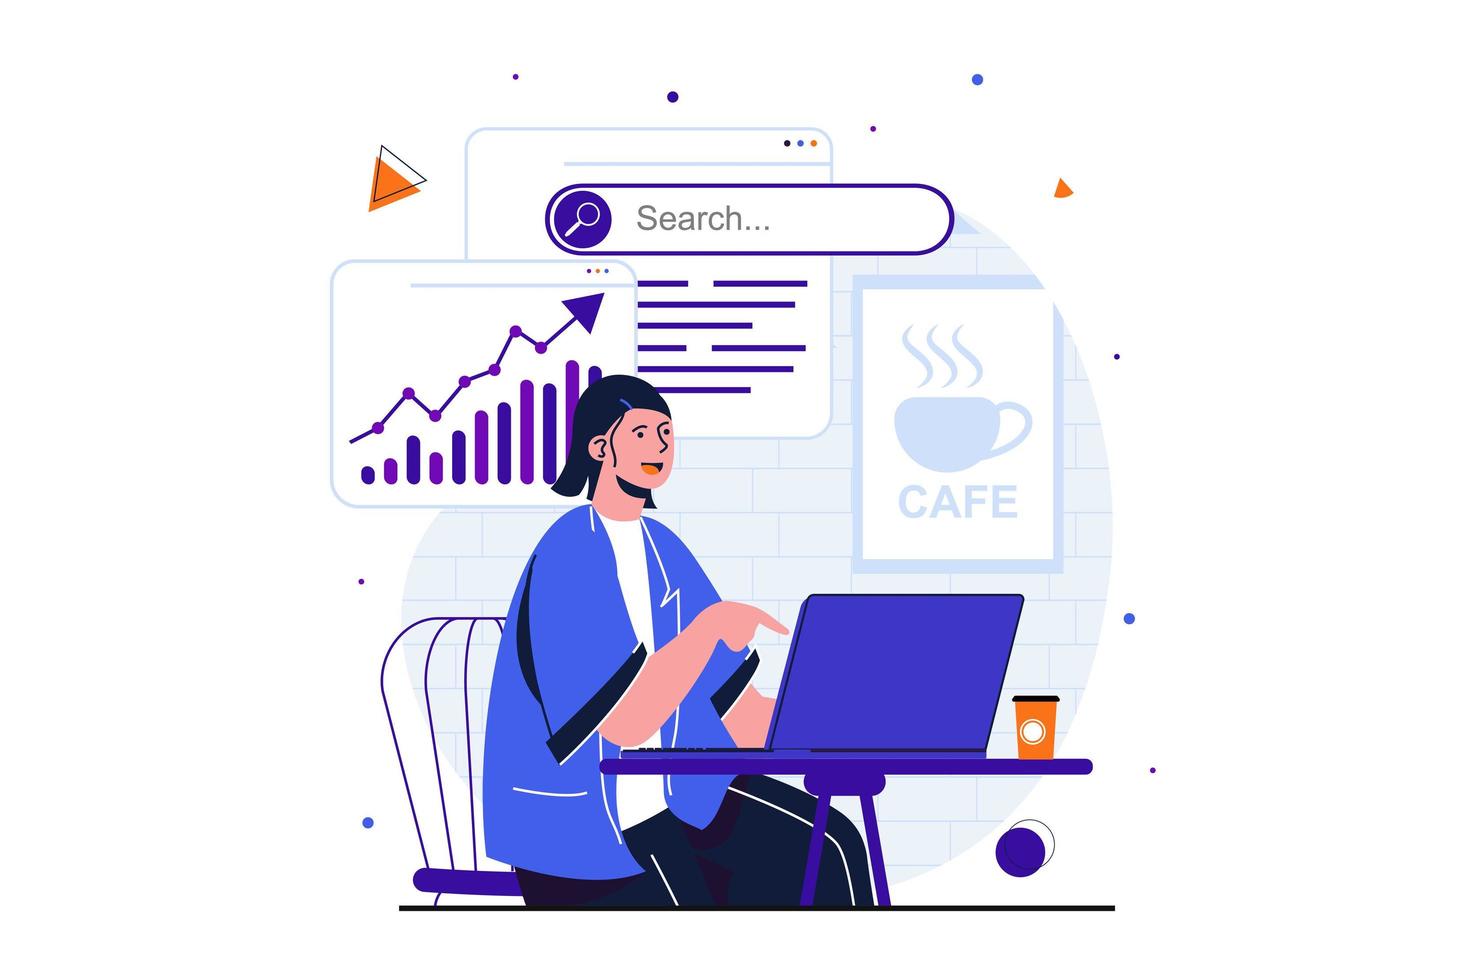 Freelance working modern flat concept for web banner design. Woman manager analyzes data from laptop, working online while sitting at table in cafe. Vector illustration with isolated people scene